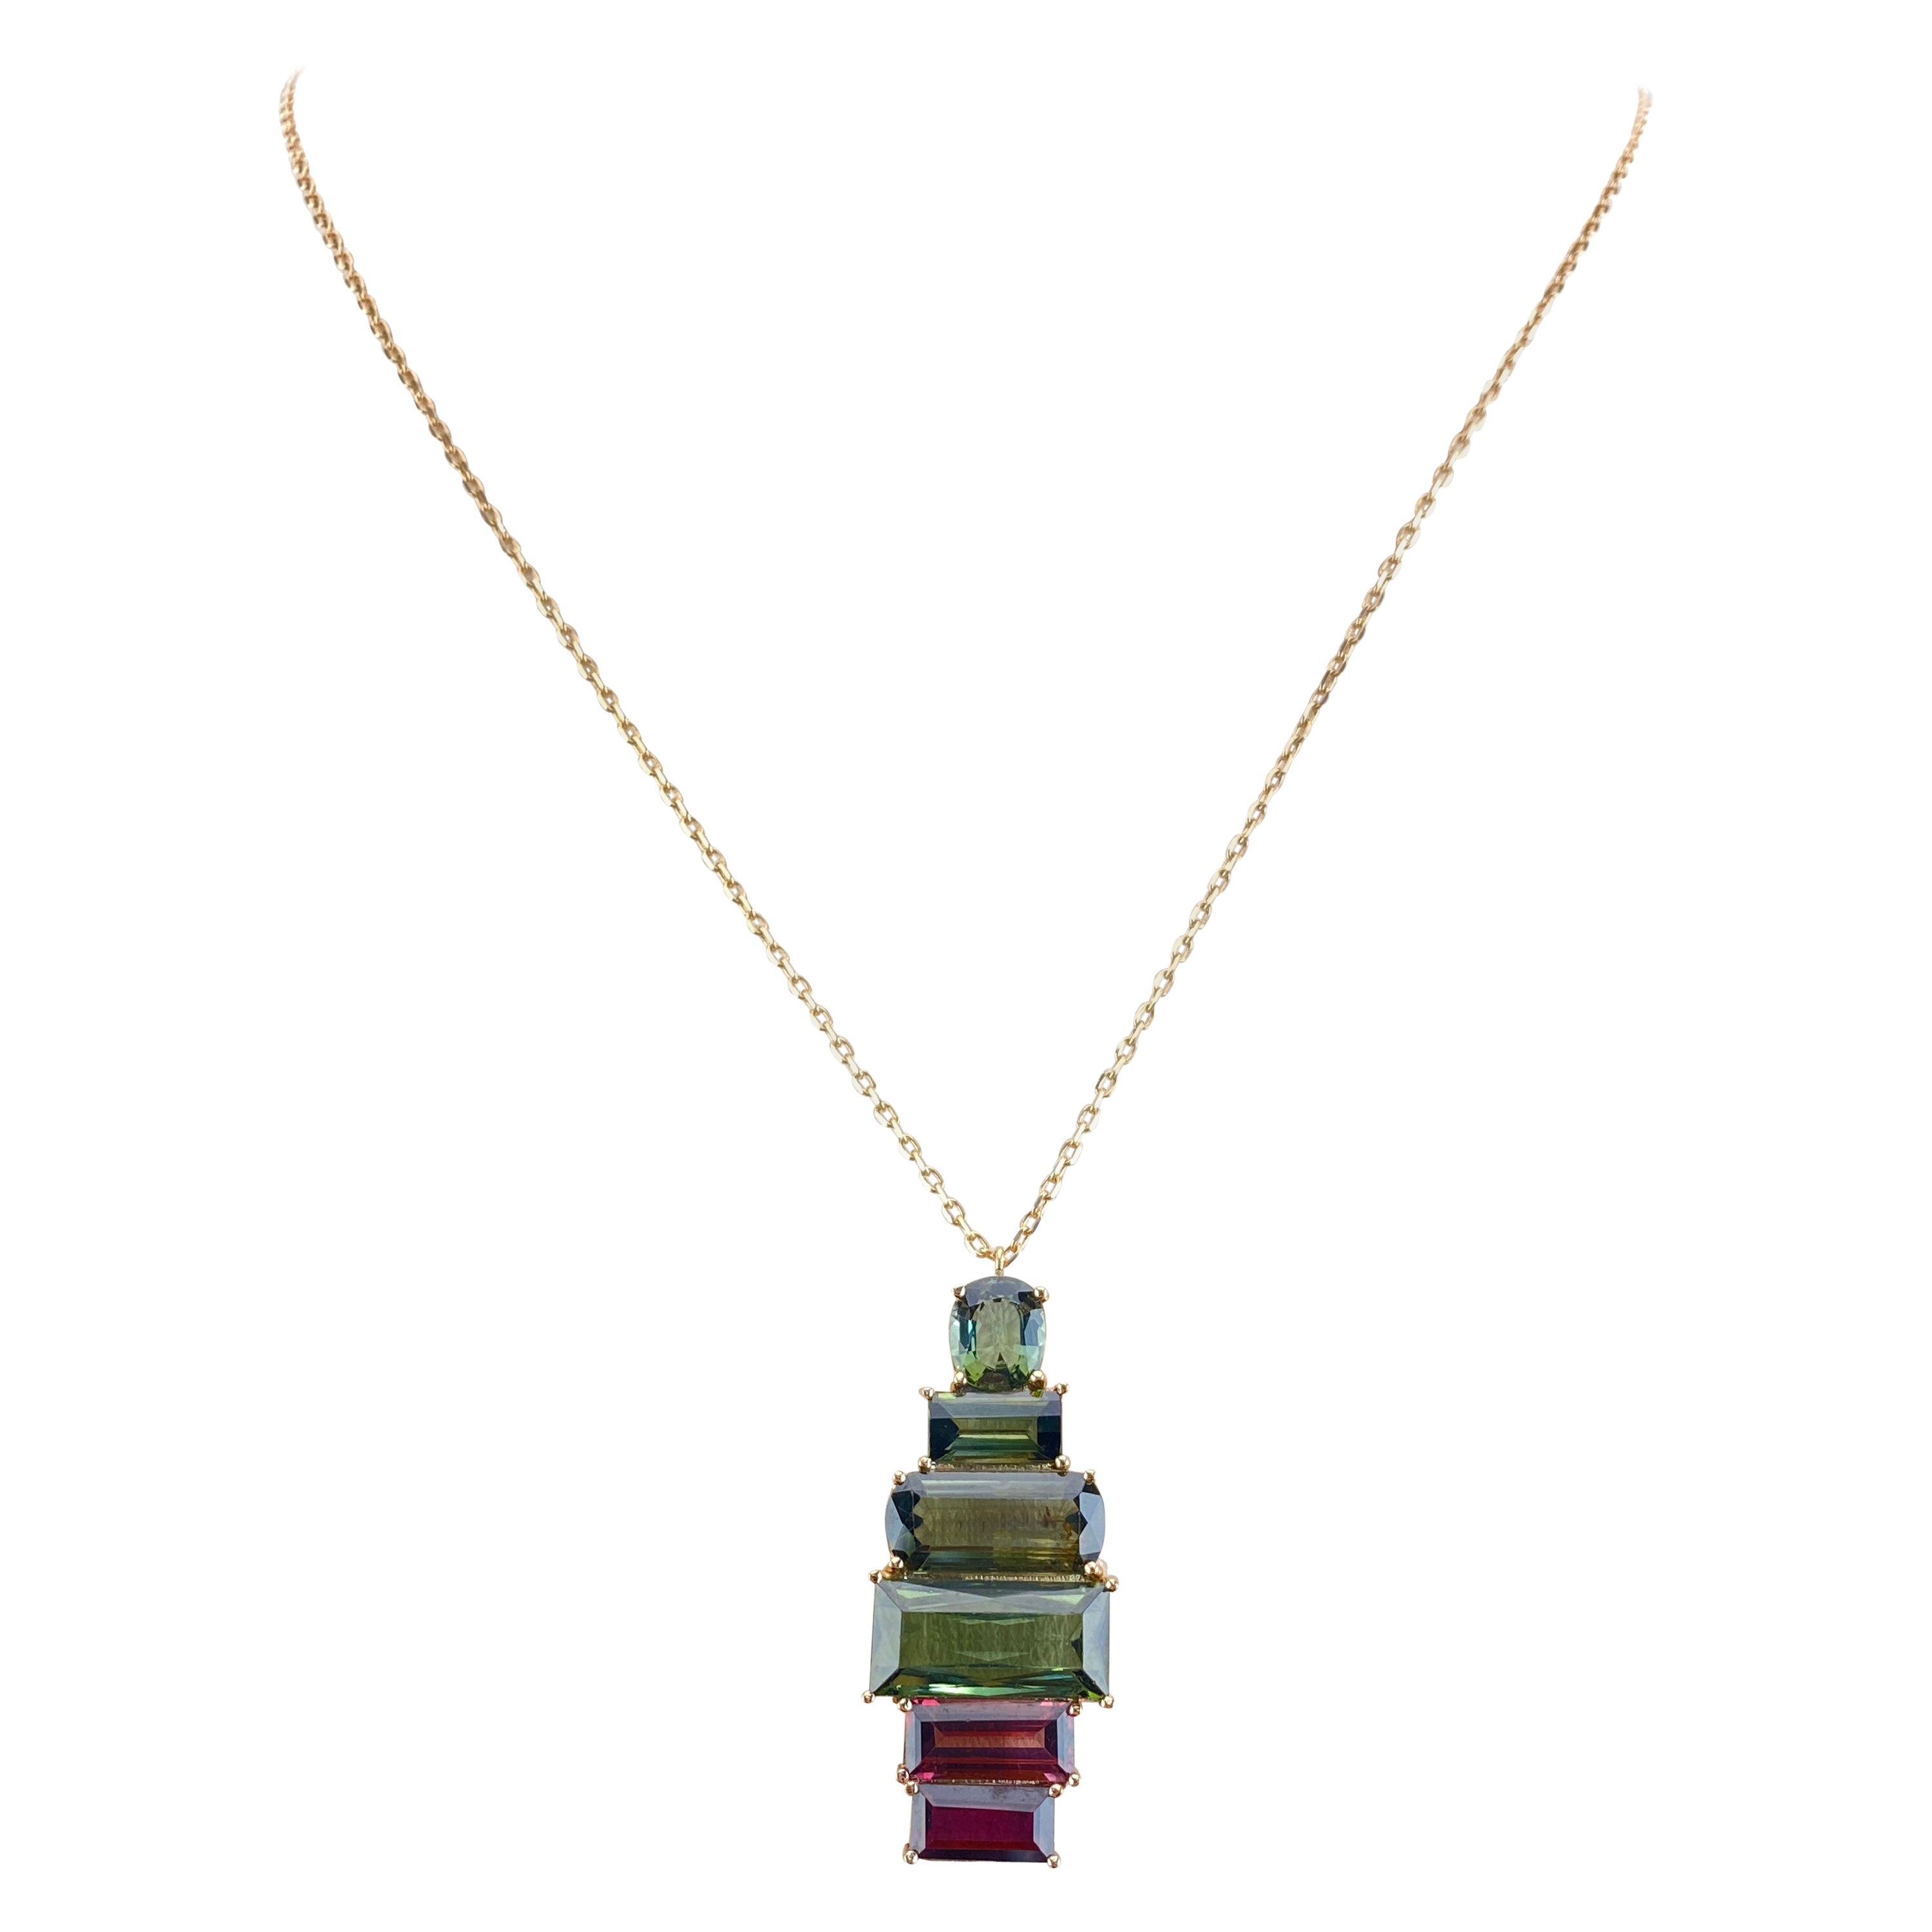 24.93 Carat Tourmaline and 18K Rose Gold Pendant Necklace For Sale